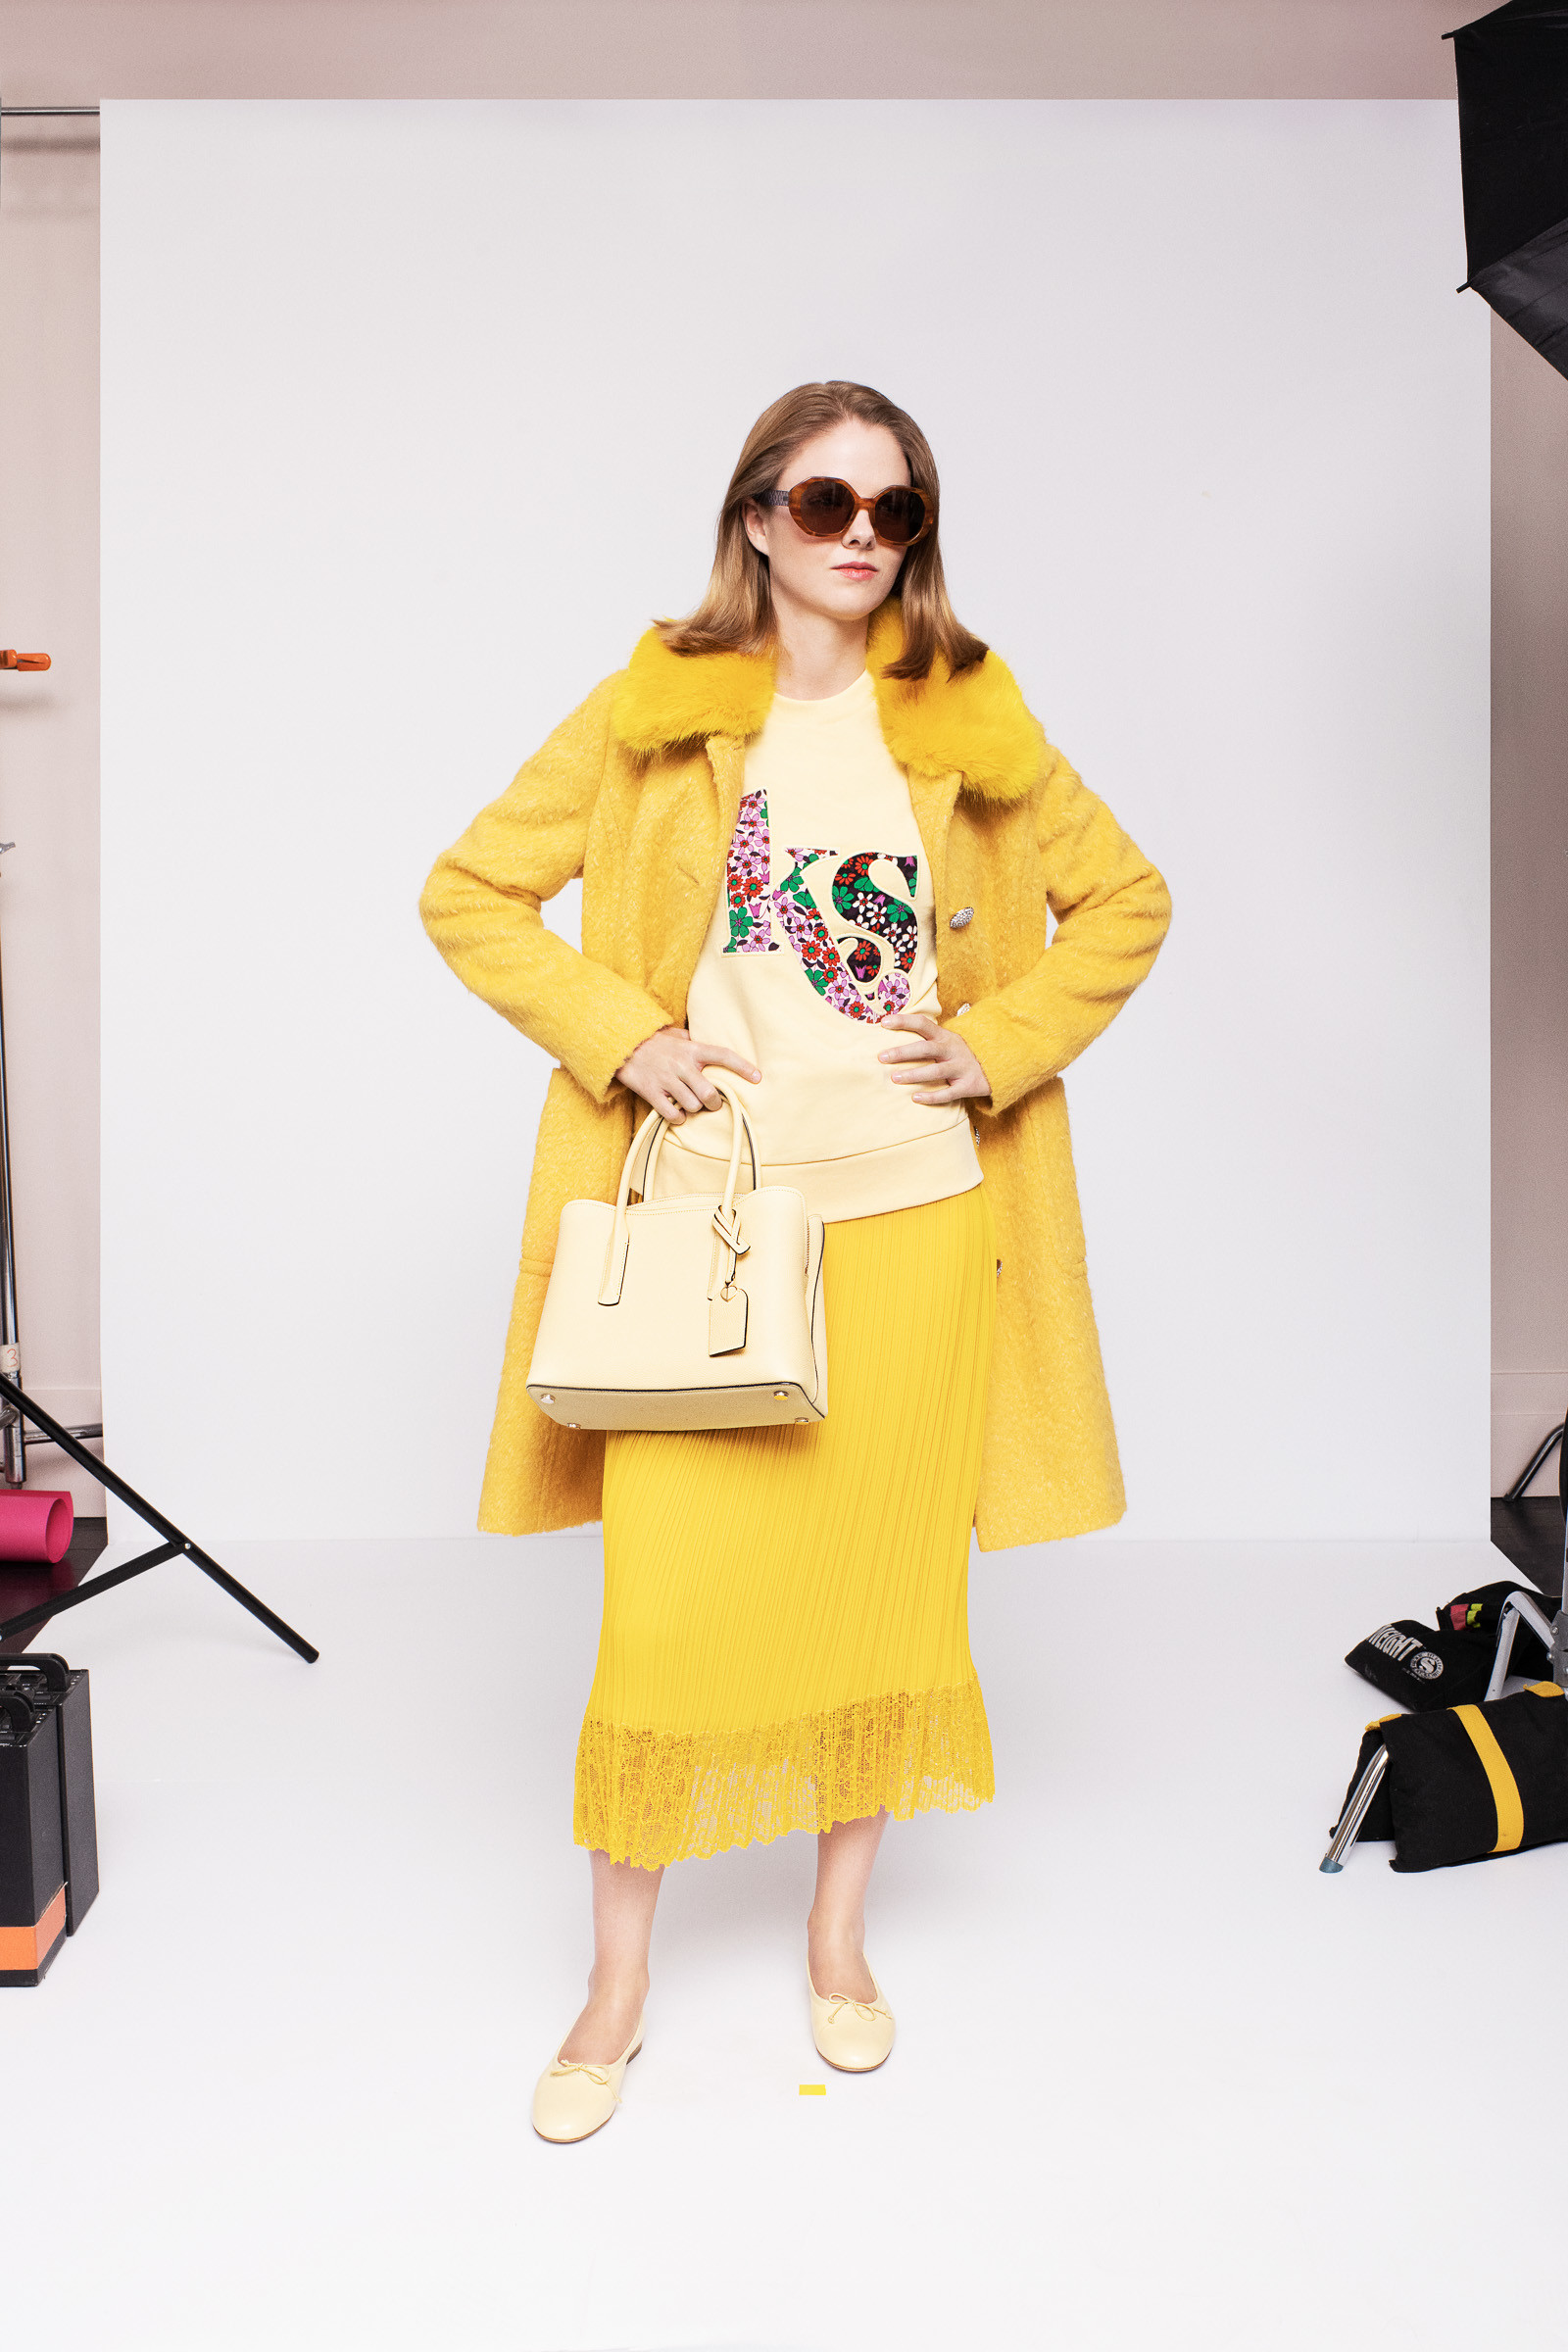 kate spade new york 2020 Fall Collectionコレクション 